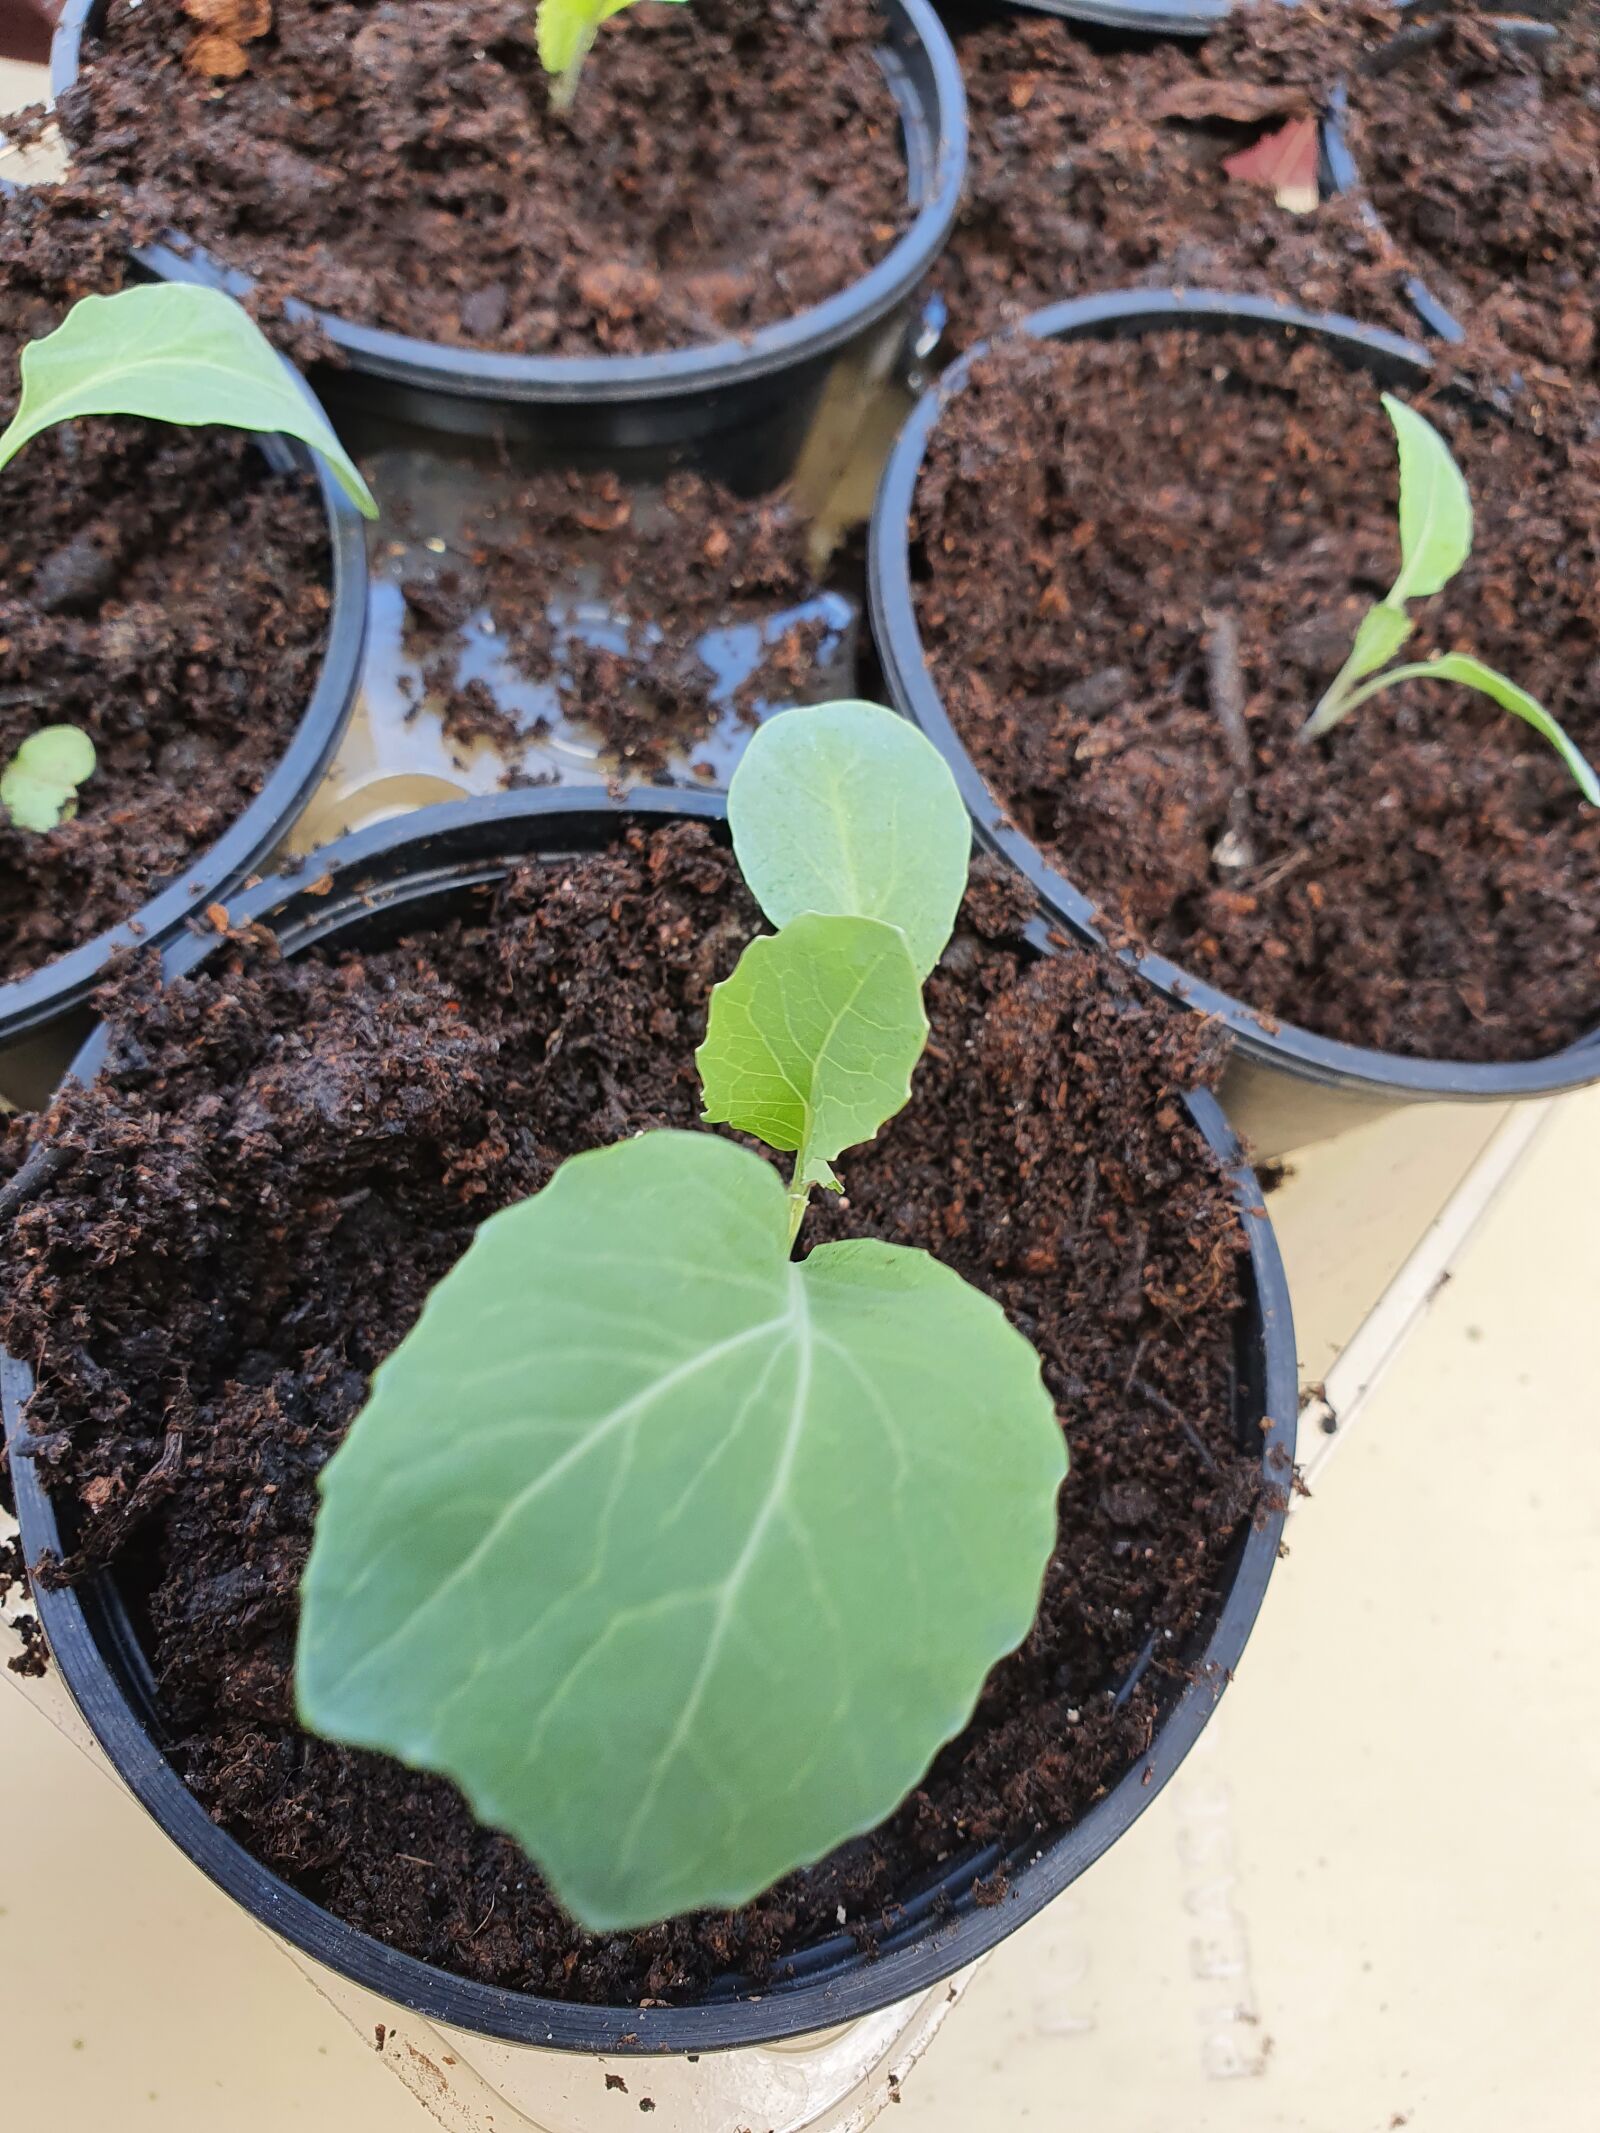 Samsung Galaxy S10 sample photo. Cabbage, seedling, green photography